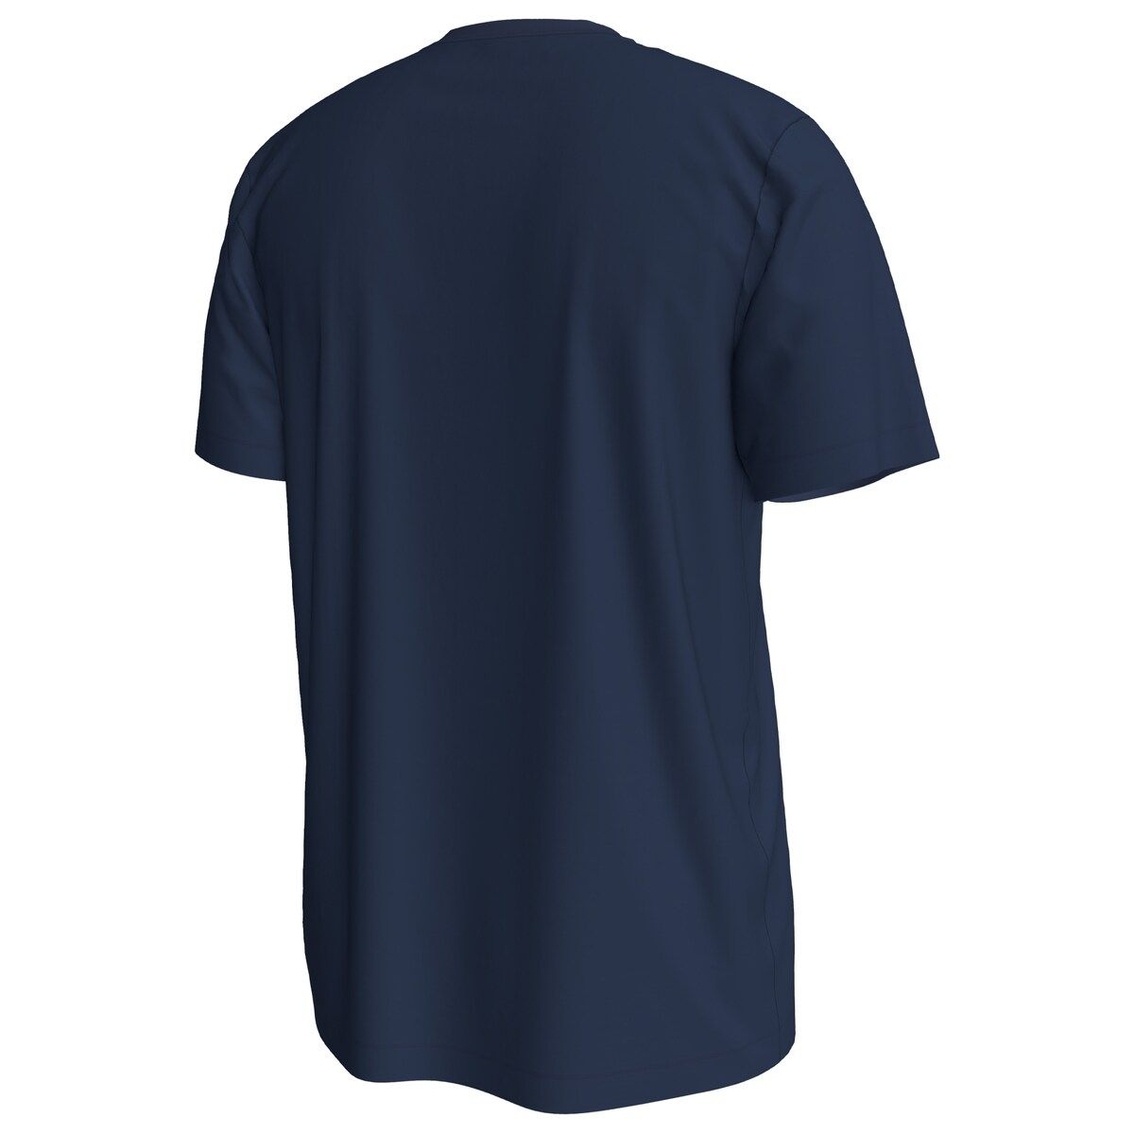 Nike Men's Navy Club America Just Do It T-Shirt - Image 4 of 4